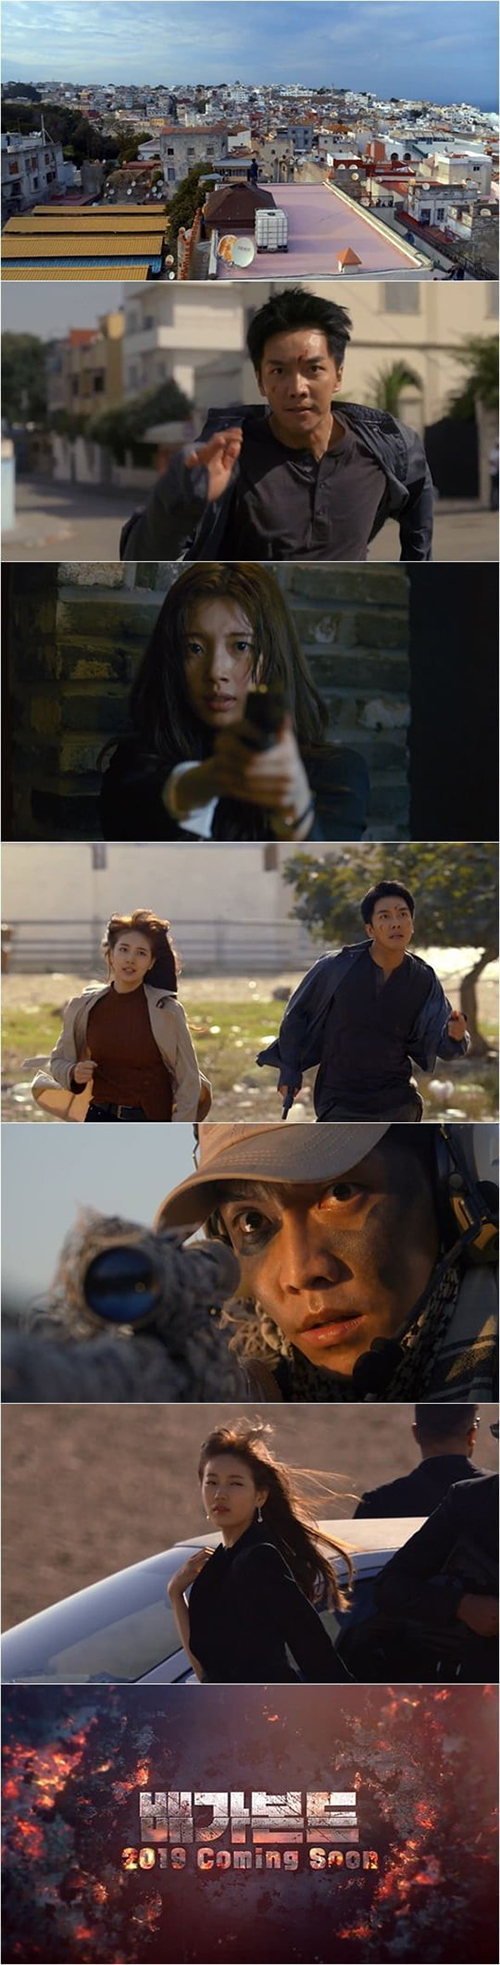 SBS new drama Vagabond starring Lee Seung-gi and Bae Suzy, which will be broadcasted in May, is gathering topics with the release of the first teaser video.Vagabond is directed by Yoo In-sik, who directed Giant, Salaryman Cho Hanji, Money Avatar, You are besieged, Mrs. Cop, Romantic Doctor Kim Sabu back, and Jang Young-cheol and Chung Kyung-soon write scripts.In the 2018 SBS Acting Grand Prize held on December 31 last year, a Teaser video of new works to be released on SBS in 2019 was pre-released, and Vagabond is a drama that shows the process of digging up a huge national corruption found in a concealed truth by a man involved in the crash of a private passenger plane.Especially, Bae Suzy and Lee Seung-gi are also expected to digest colorful action gods and shooting gods and transform into acting.Vagabond is a drama about the process of a normal man being involved in a civil-port passenger plane crash and digging into national corruption. It has attracted attention as a masterpiece starring Lee Seung-gi and Bae Suzy, which invested about 25 billion won in production costs before the broadcast.It will be broadcasted in May as a drama that is in full swing in the pre-production since June last year, and netizens who watched Teaser are getting a great response with the back response that they already have a great expectation.Photo  SBS Provision